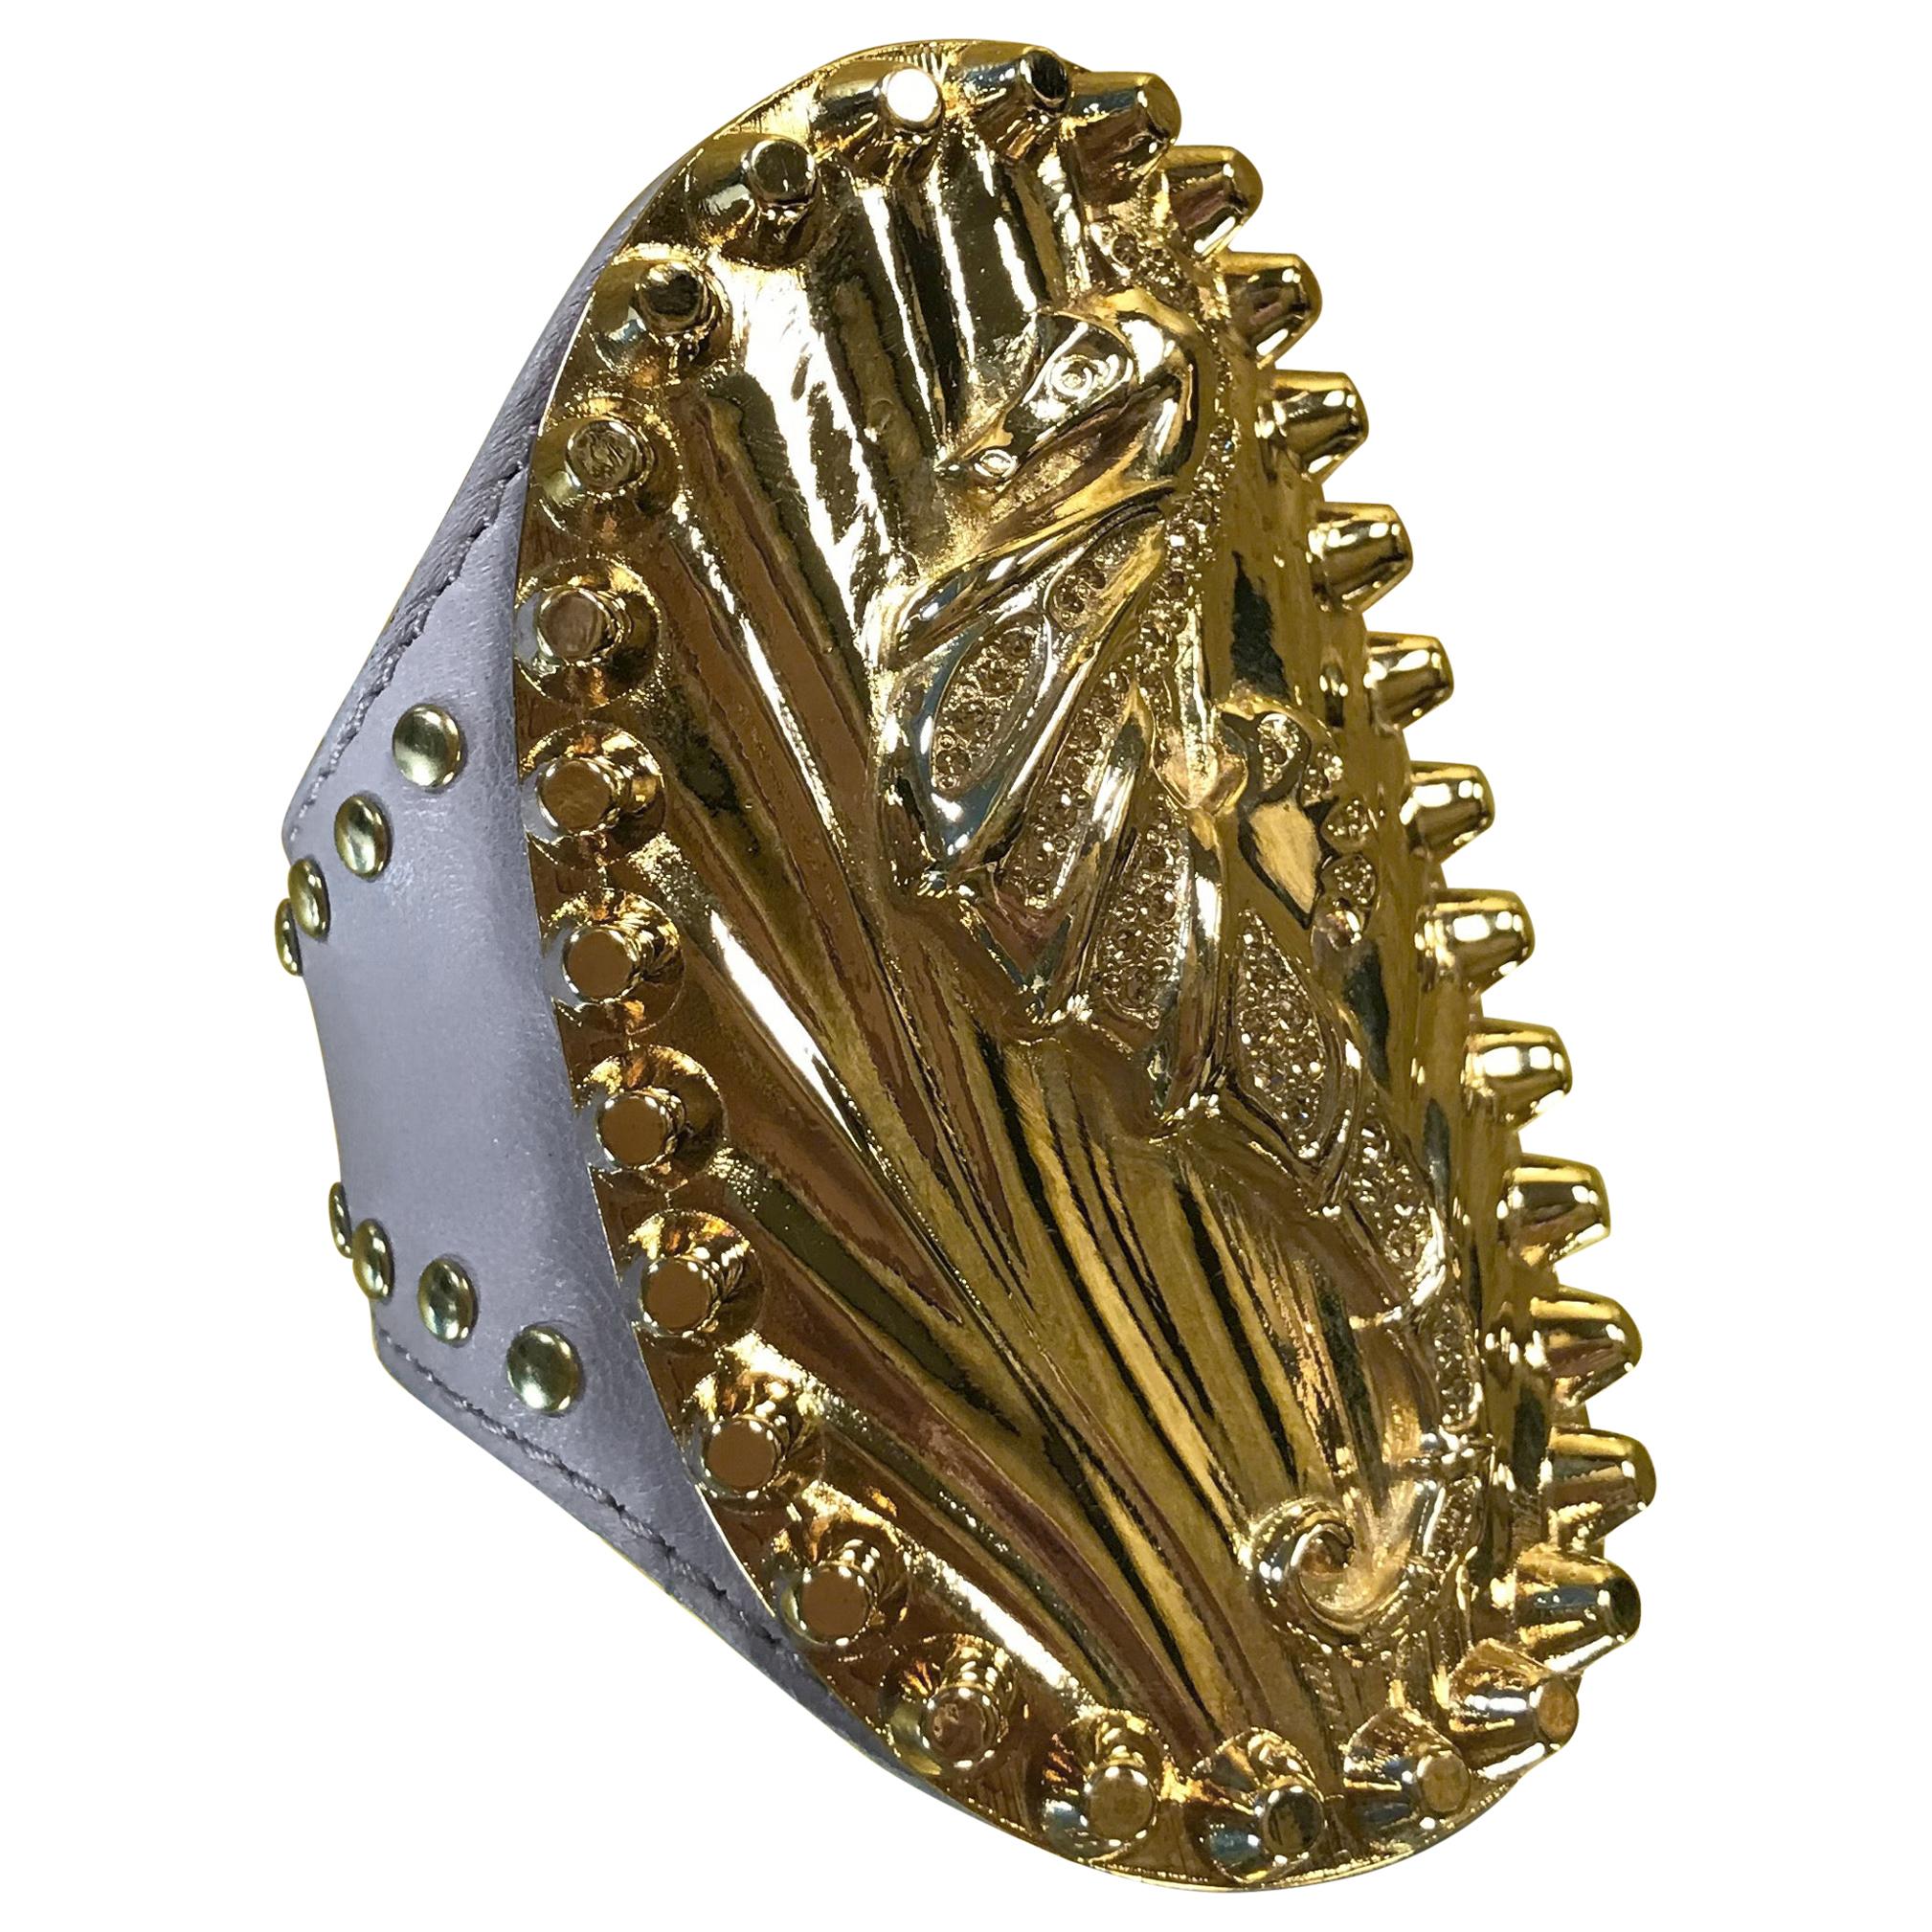 S/S 2012 Versace studded lilac leather cuff bracelet with seahorse